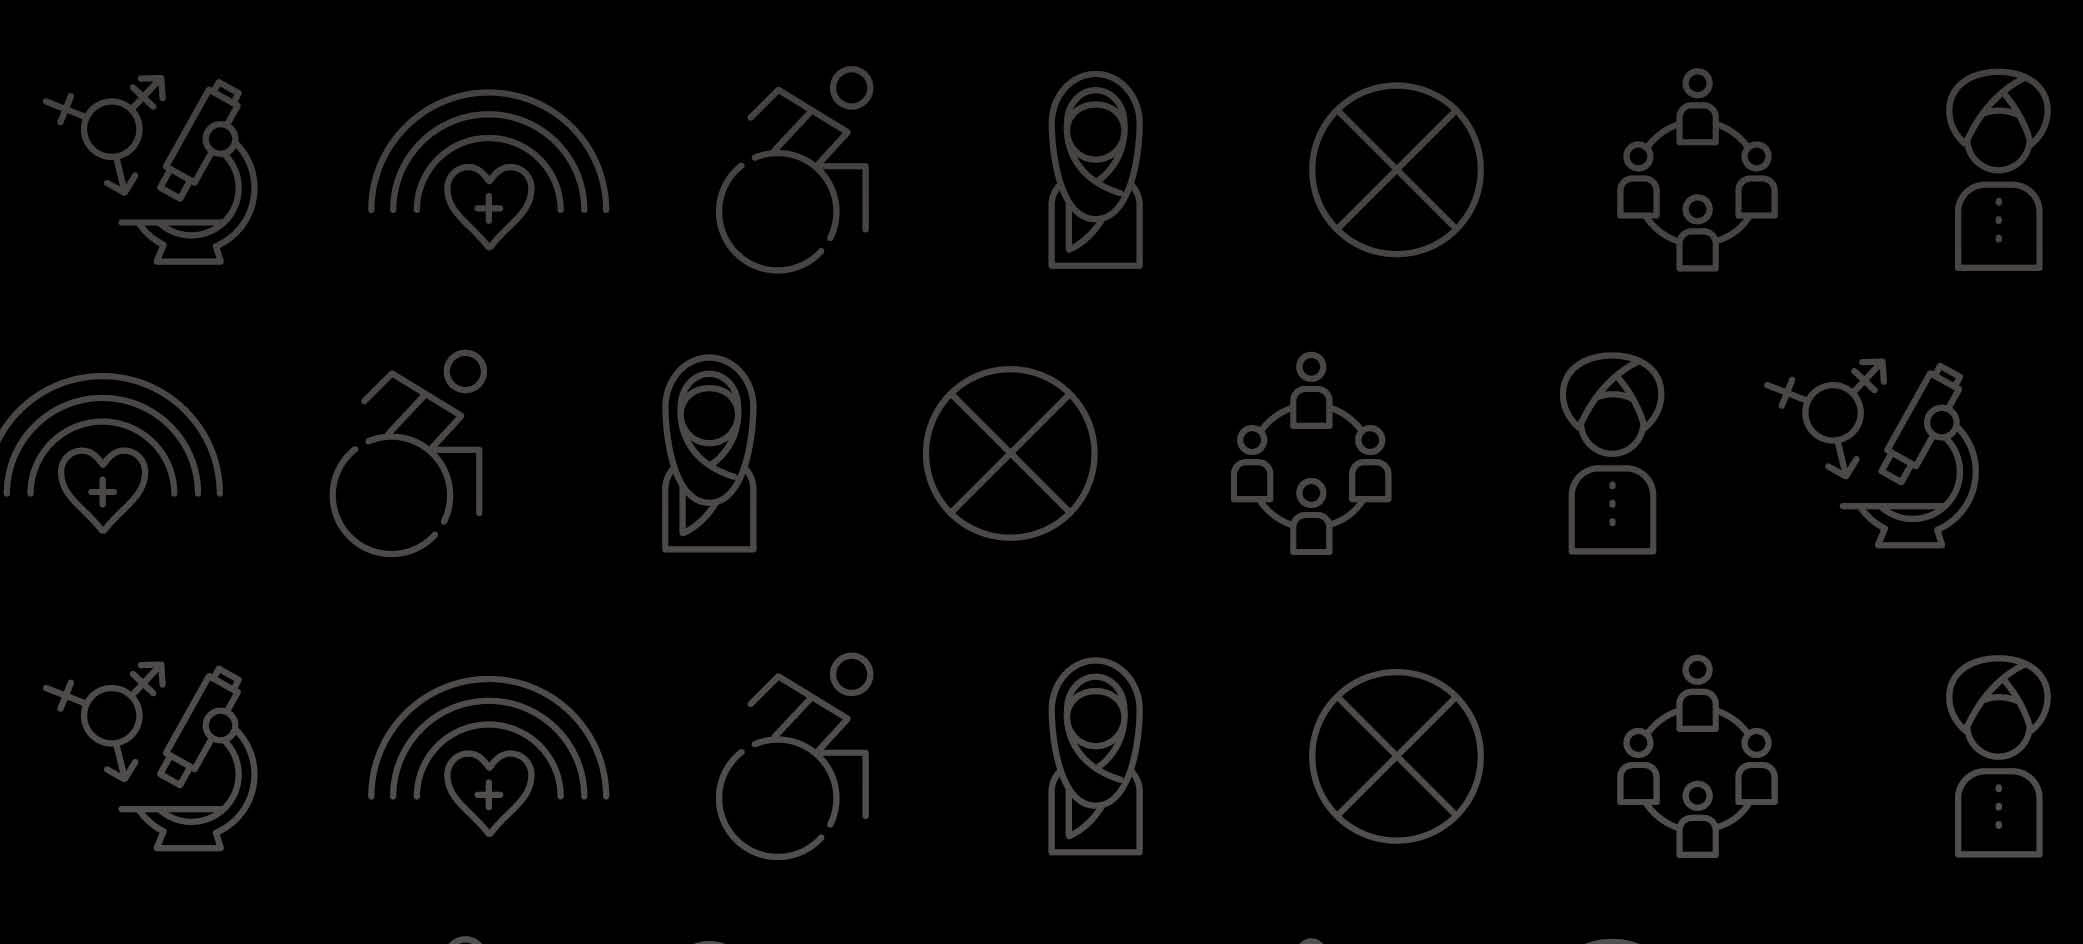 white_tech_icons_on_black_background